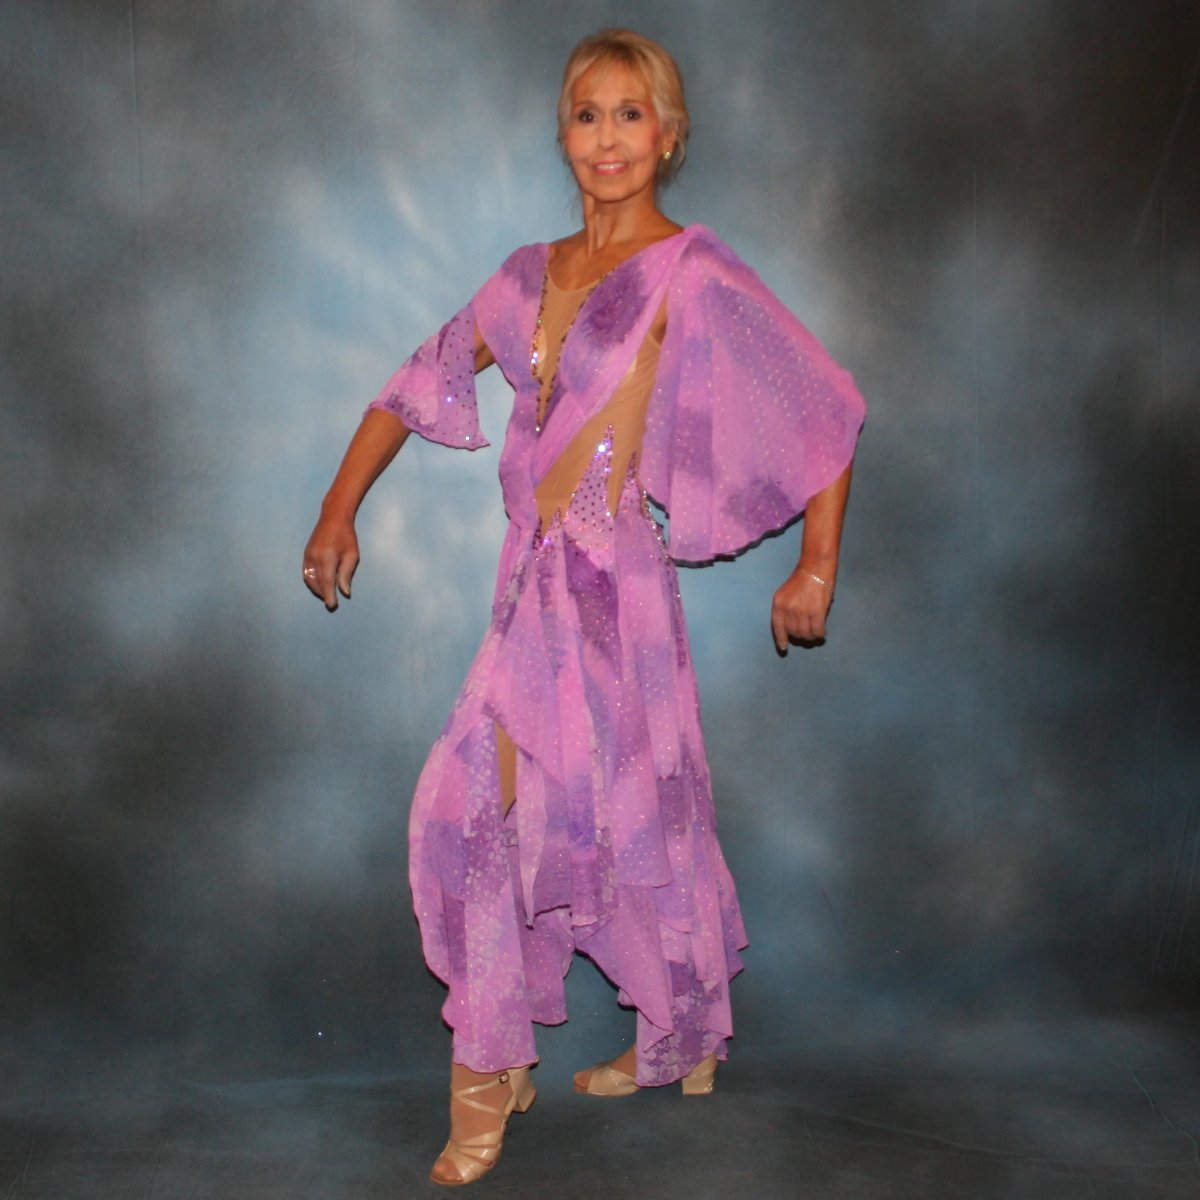 Crystal's Creations side view of Orchid ballroom dress created in yards of a textured chiffon in shades of orchids & purples on a nude illusion base with floats & Swarovski stonework in gorgeous shades of orchids & purples.